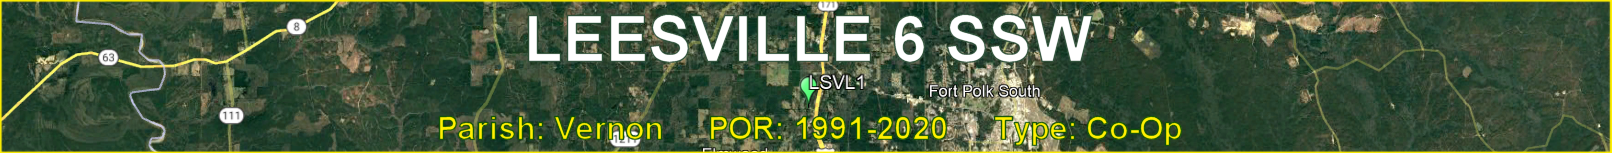 Title image for Leesville 6 SSW